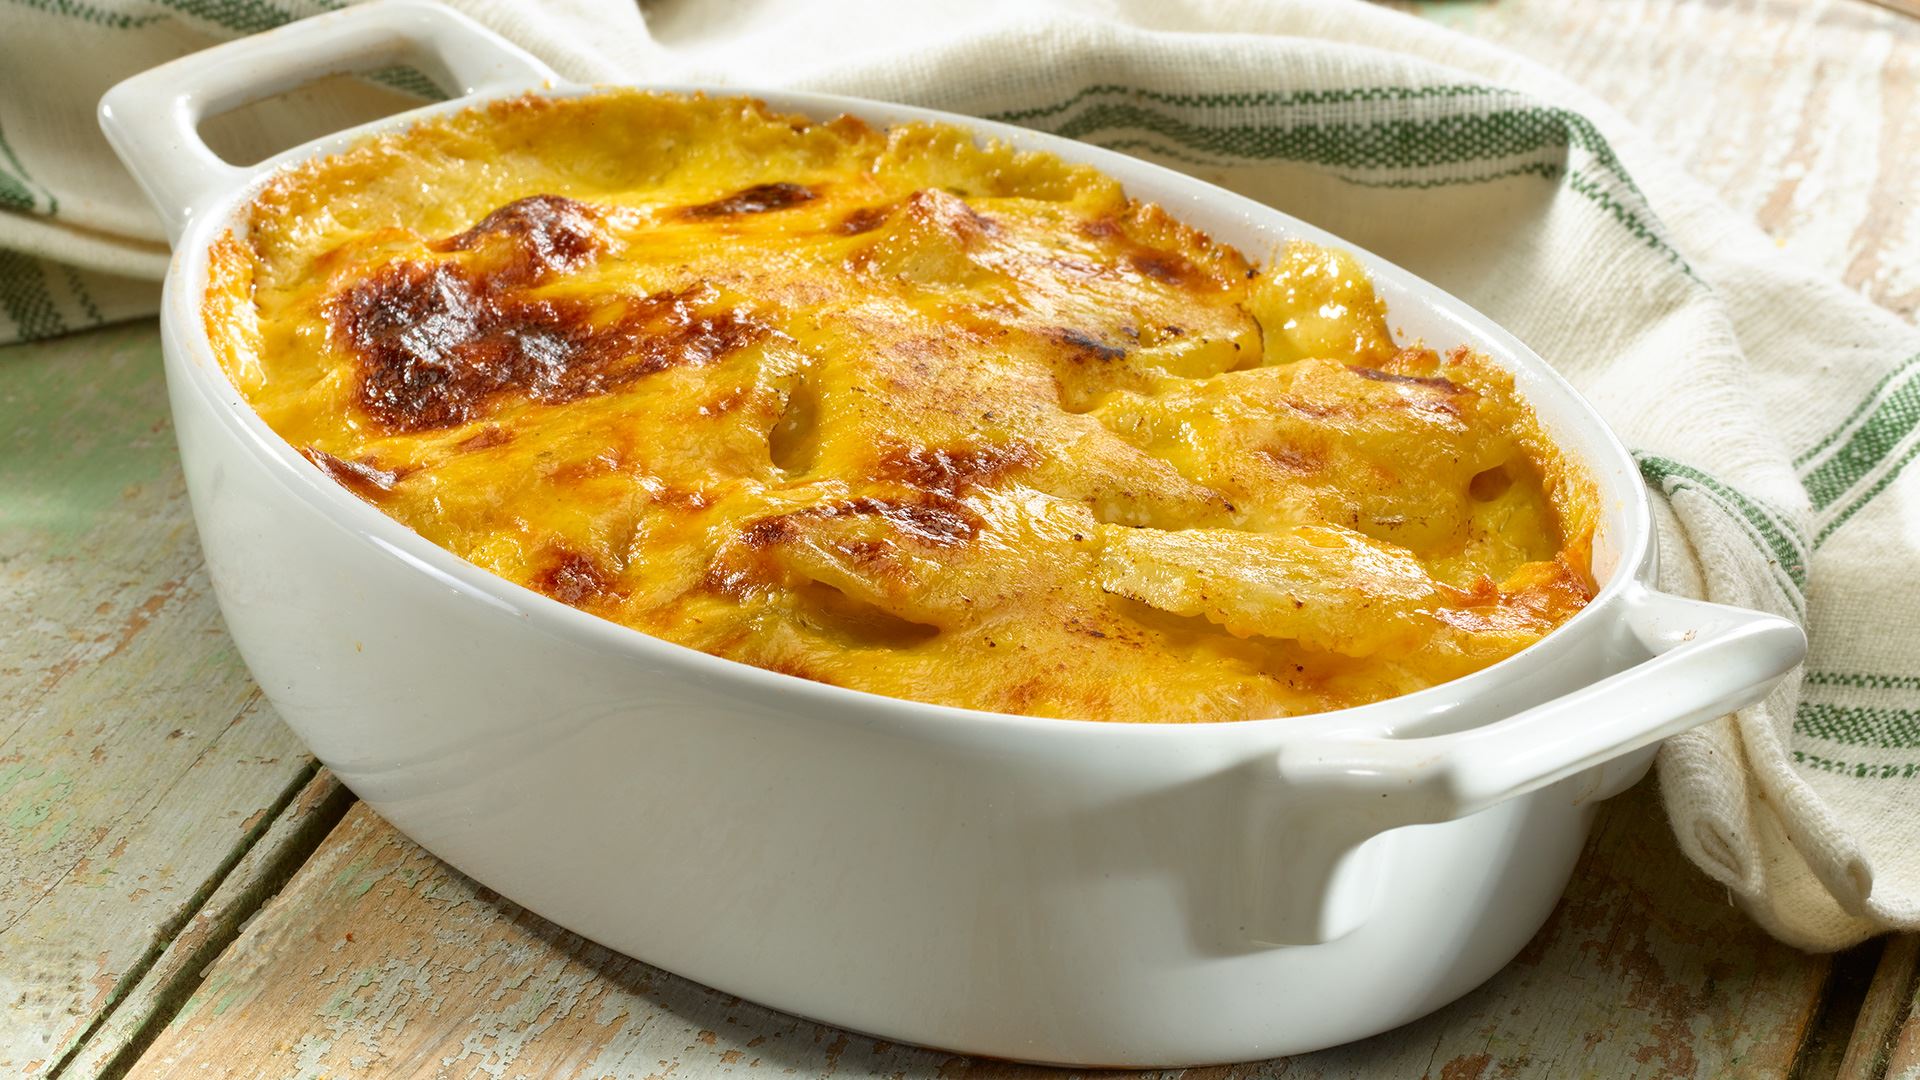 Spiced Scalloped Potatoes